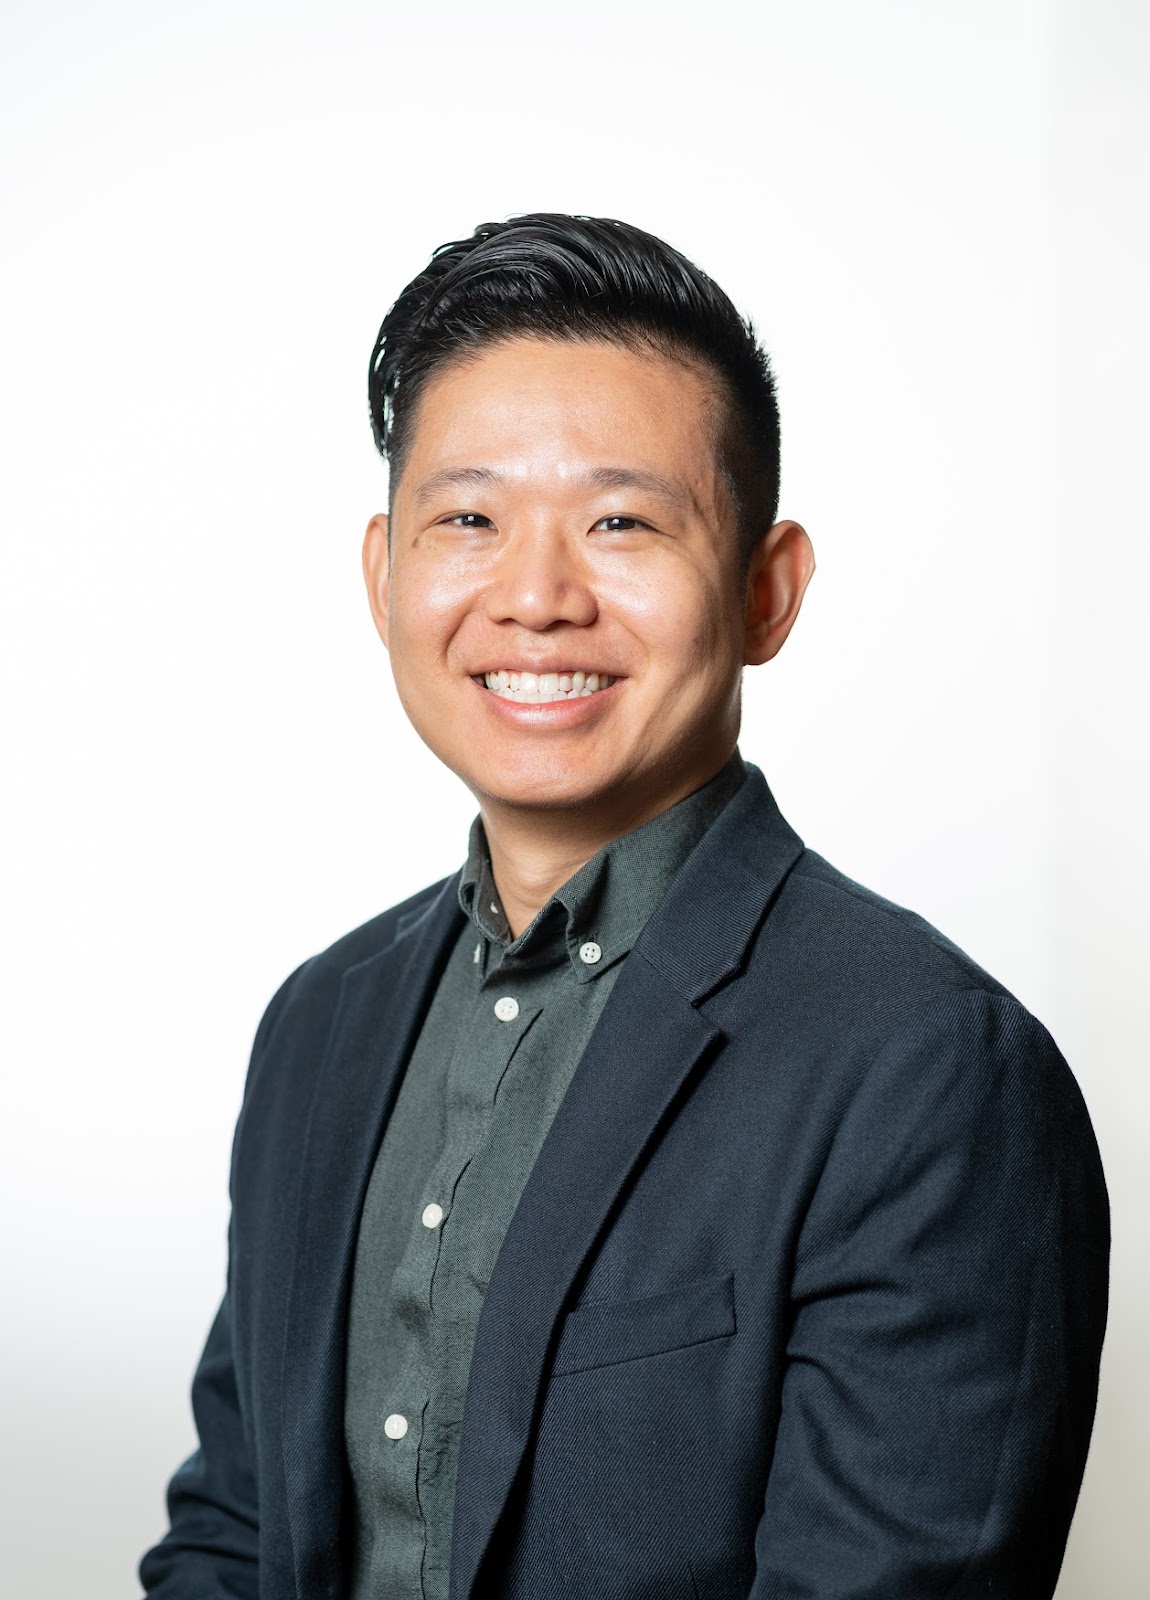 Sharing Pharmacy Informatics Content Online with Brian K. Fung